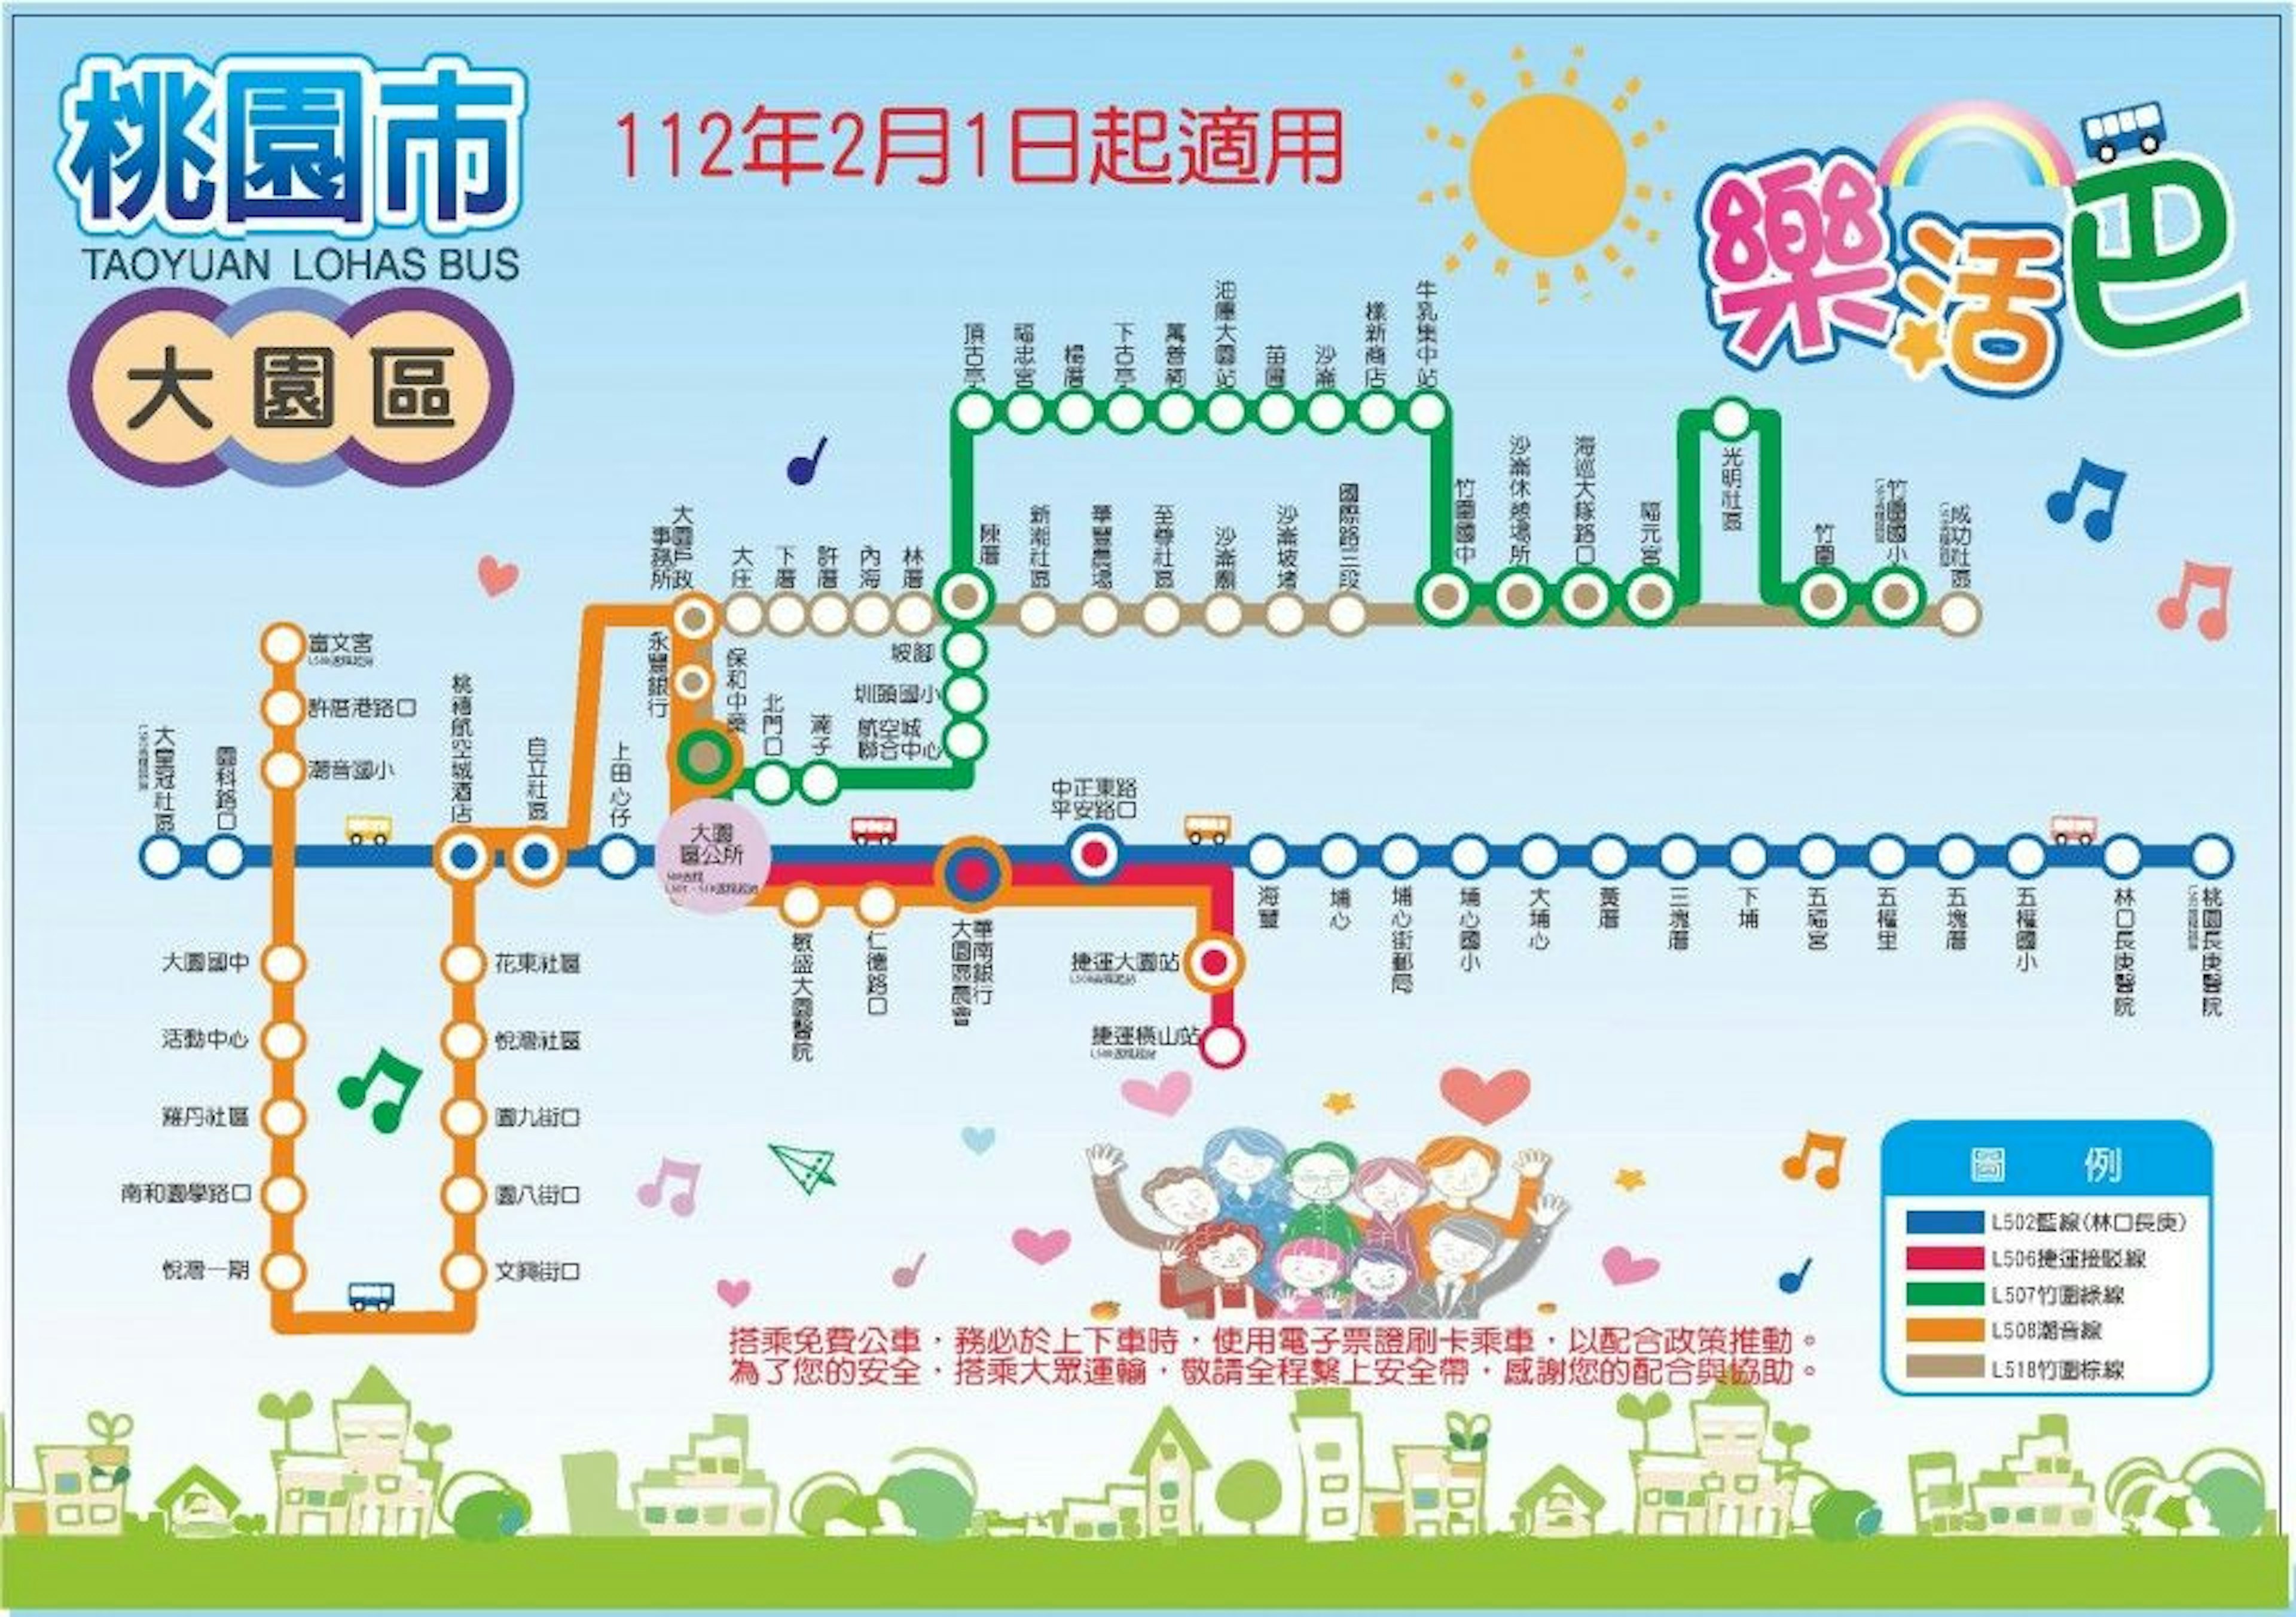 L506Route Map-桃園 Bus